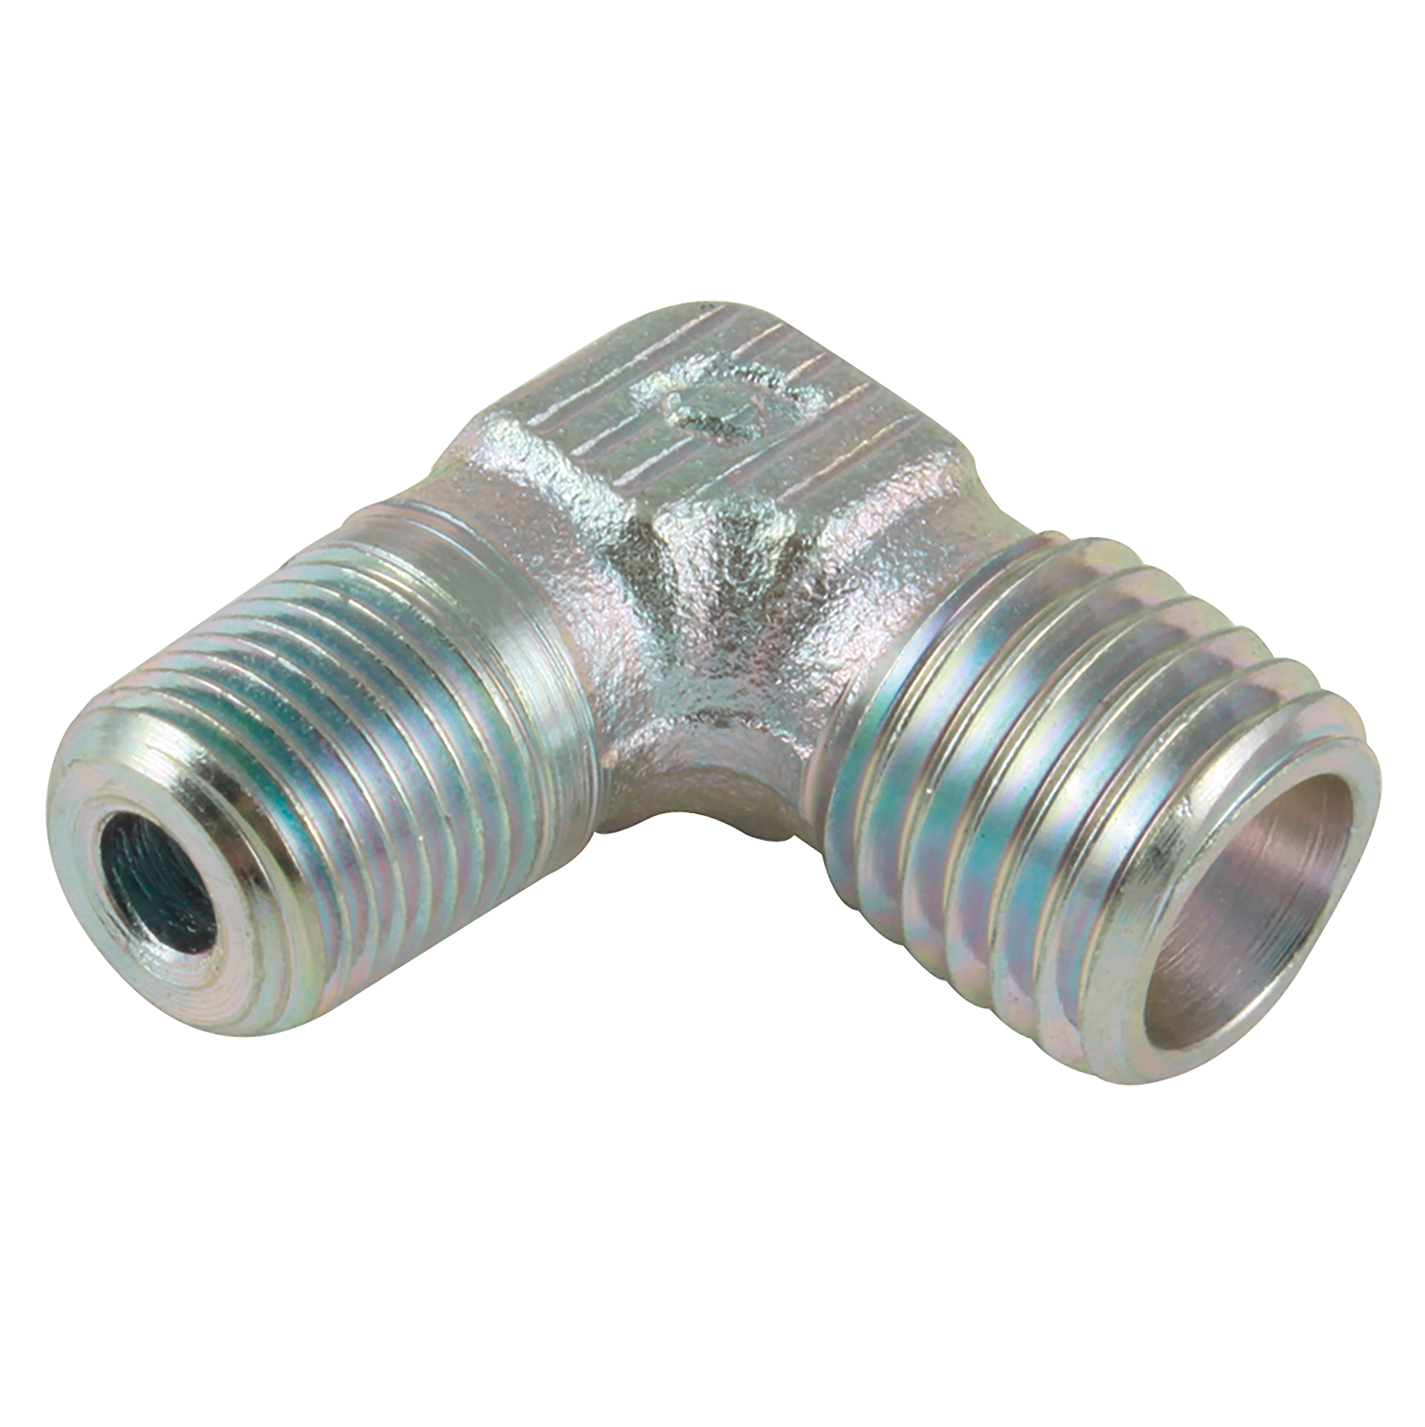 8mm Compression x 1/4 Bsp Male Taper Elbow, Compression Pipe Fittings